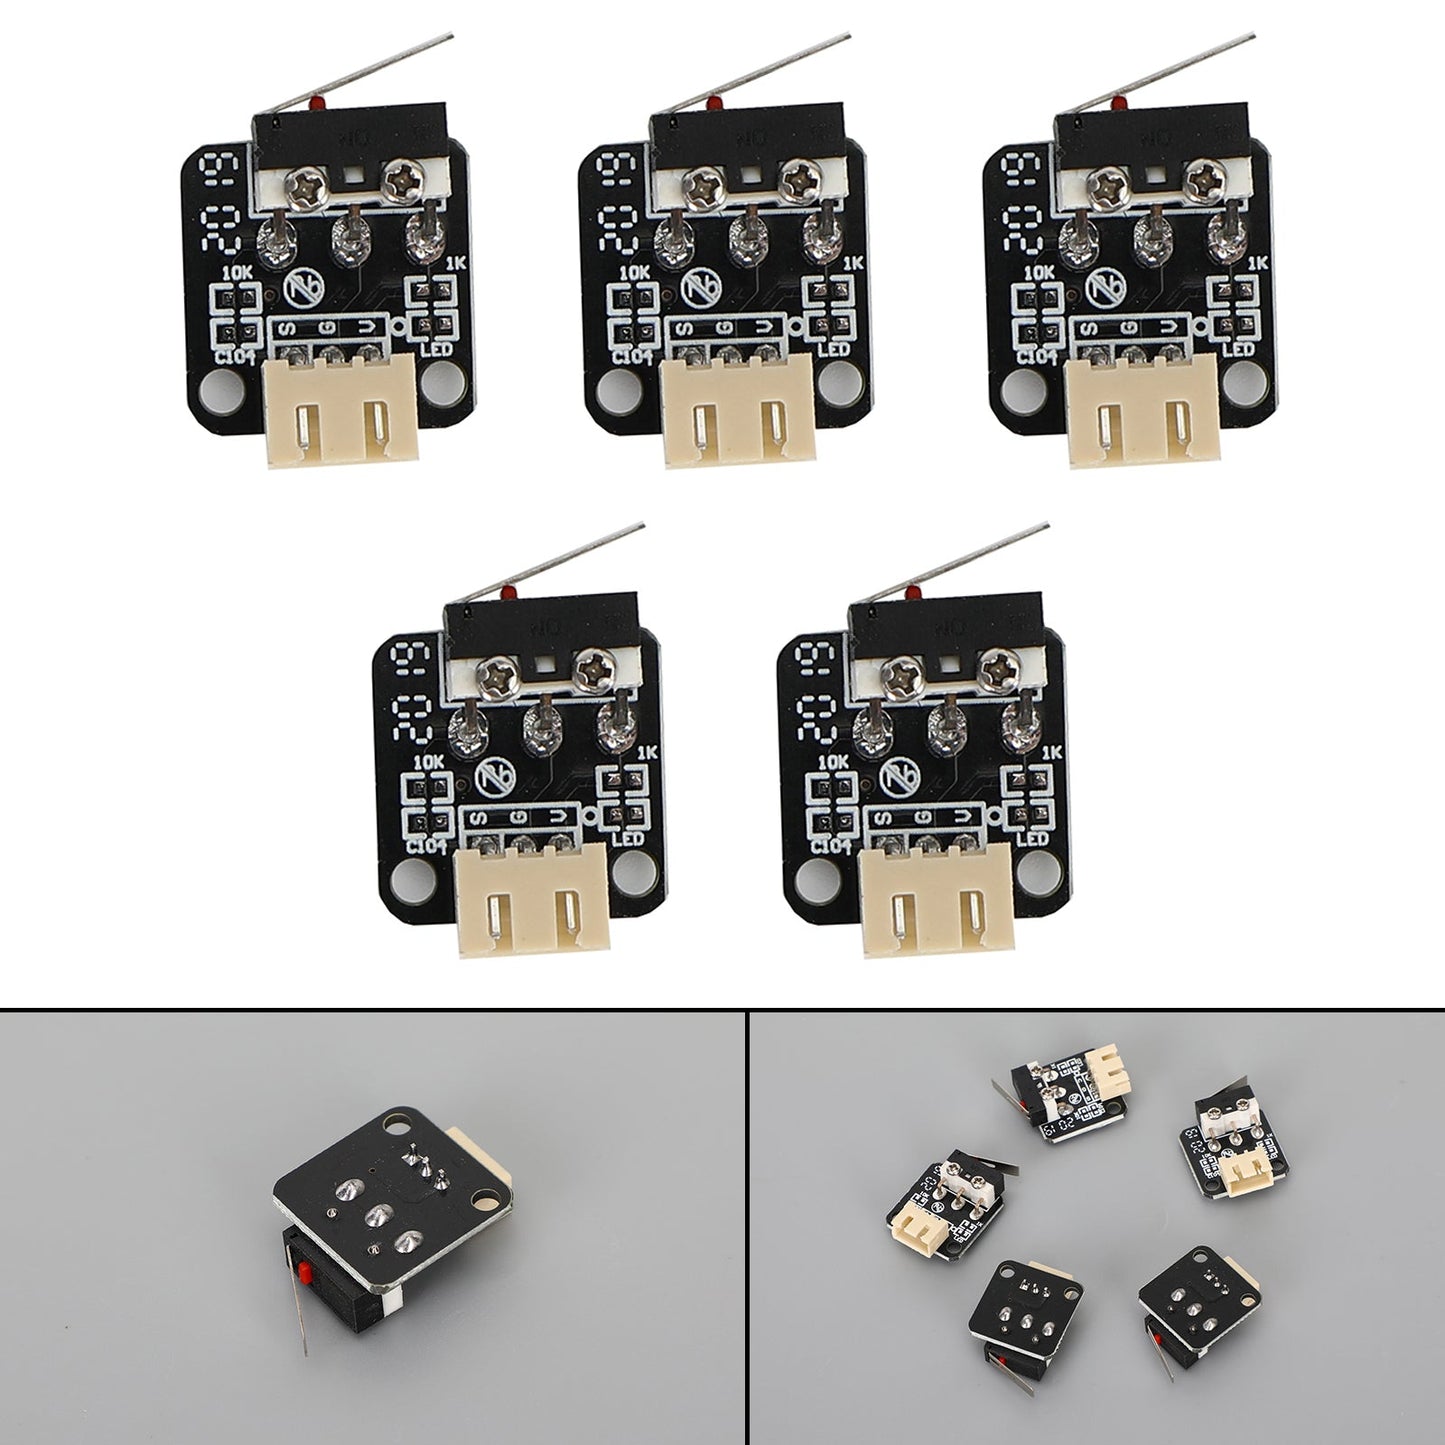 5pcs Creality 3D Printer Parts End Stop Limit Switch 3 Pin Fit for CR-10 Ender3